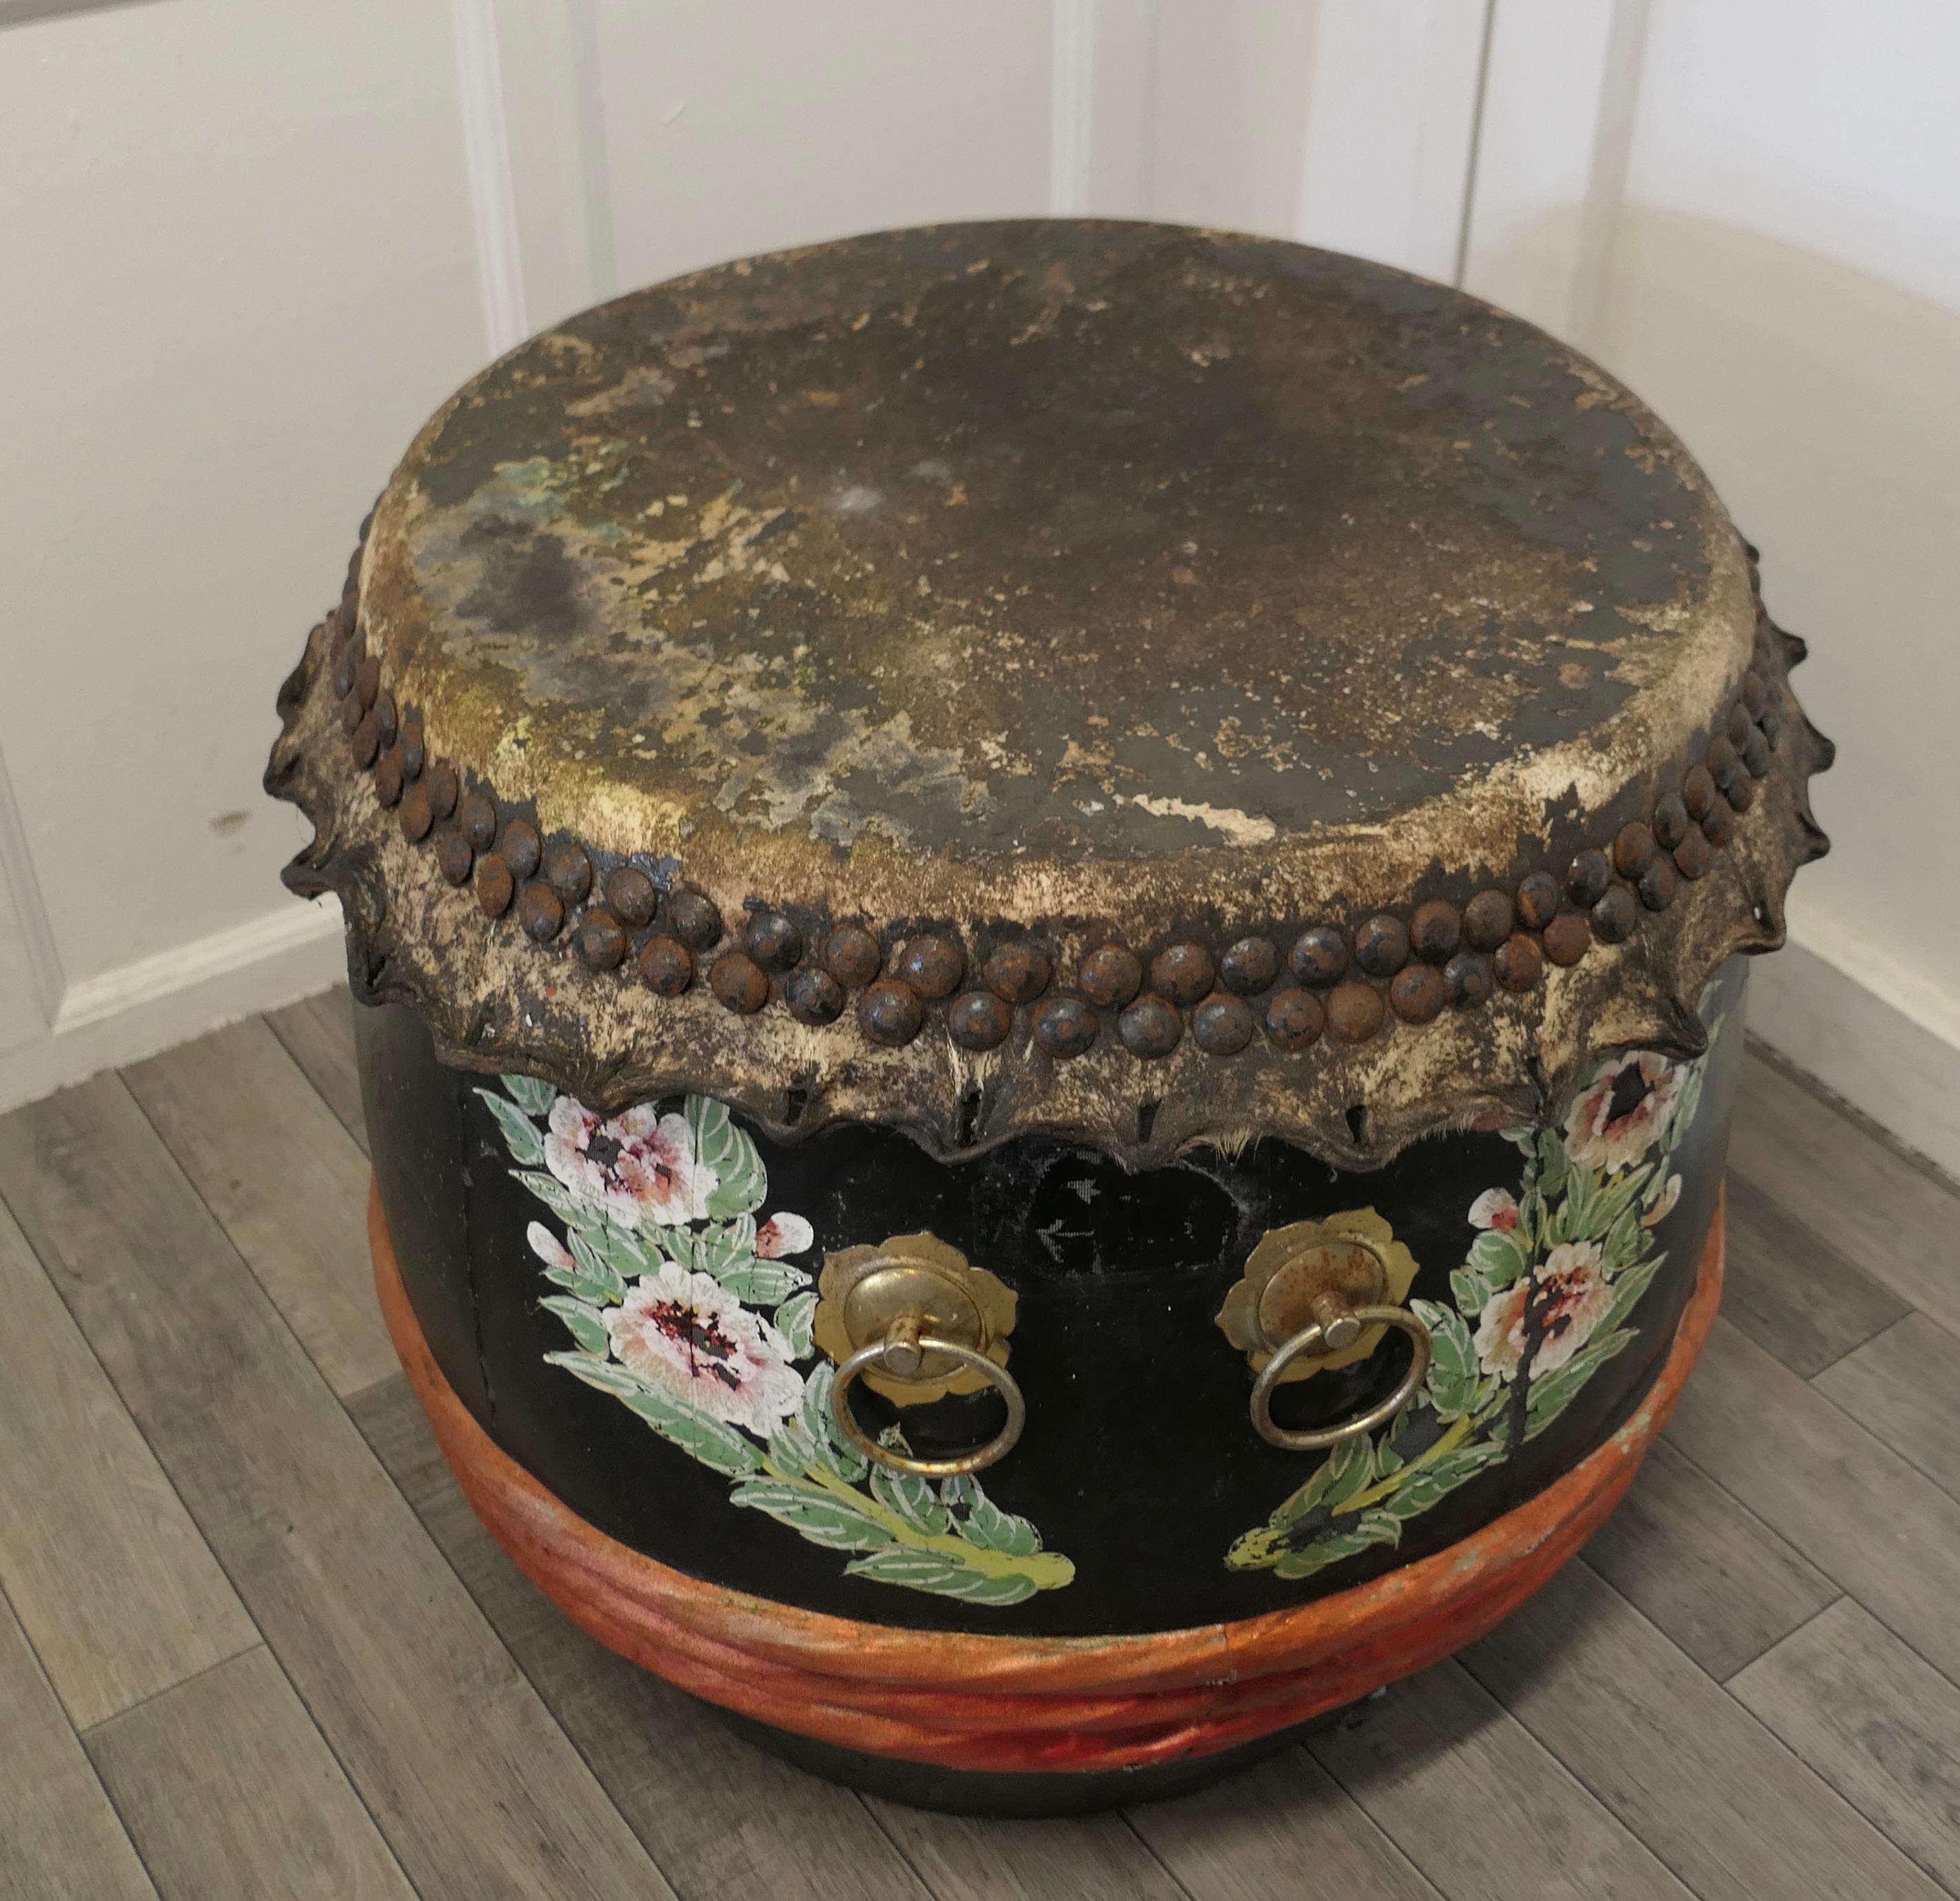 Large Painted Folk Art Drum

This is a very bright and colorful piece, the Drum is made in wood with colorful pictures on the outside, it has 3 brass ring handles, originally there would have been 4
The interior is fully sprung and the skin is